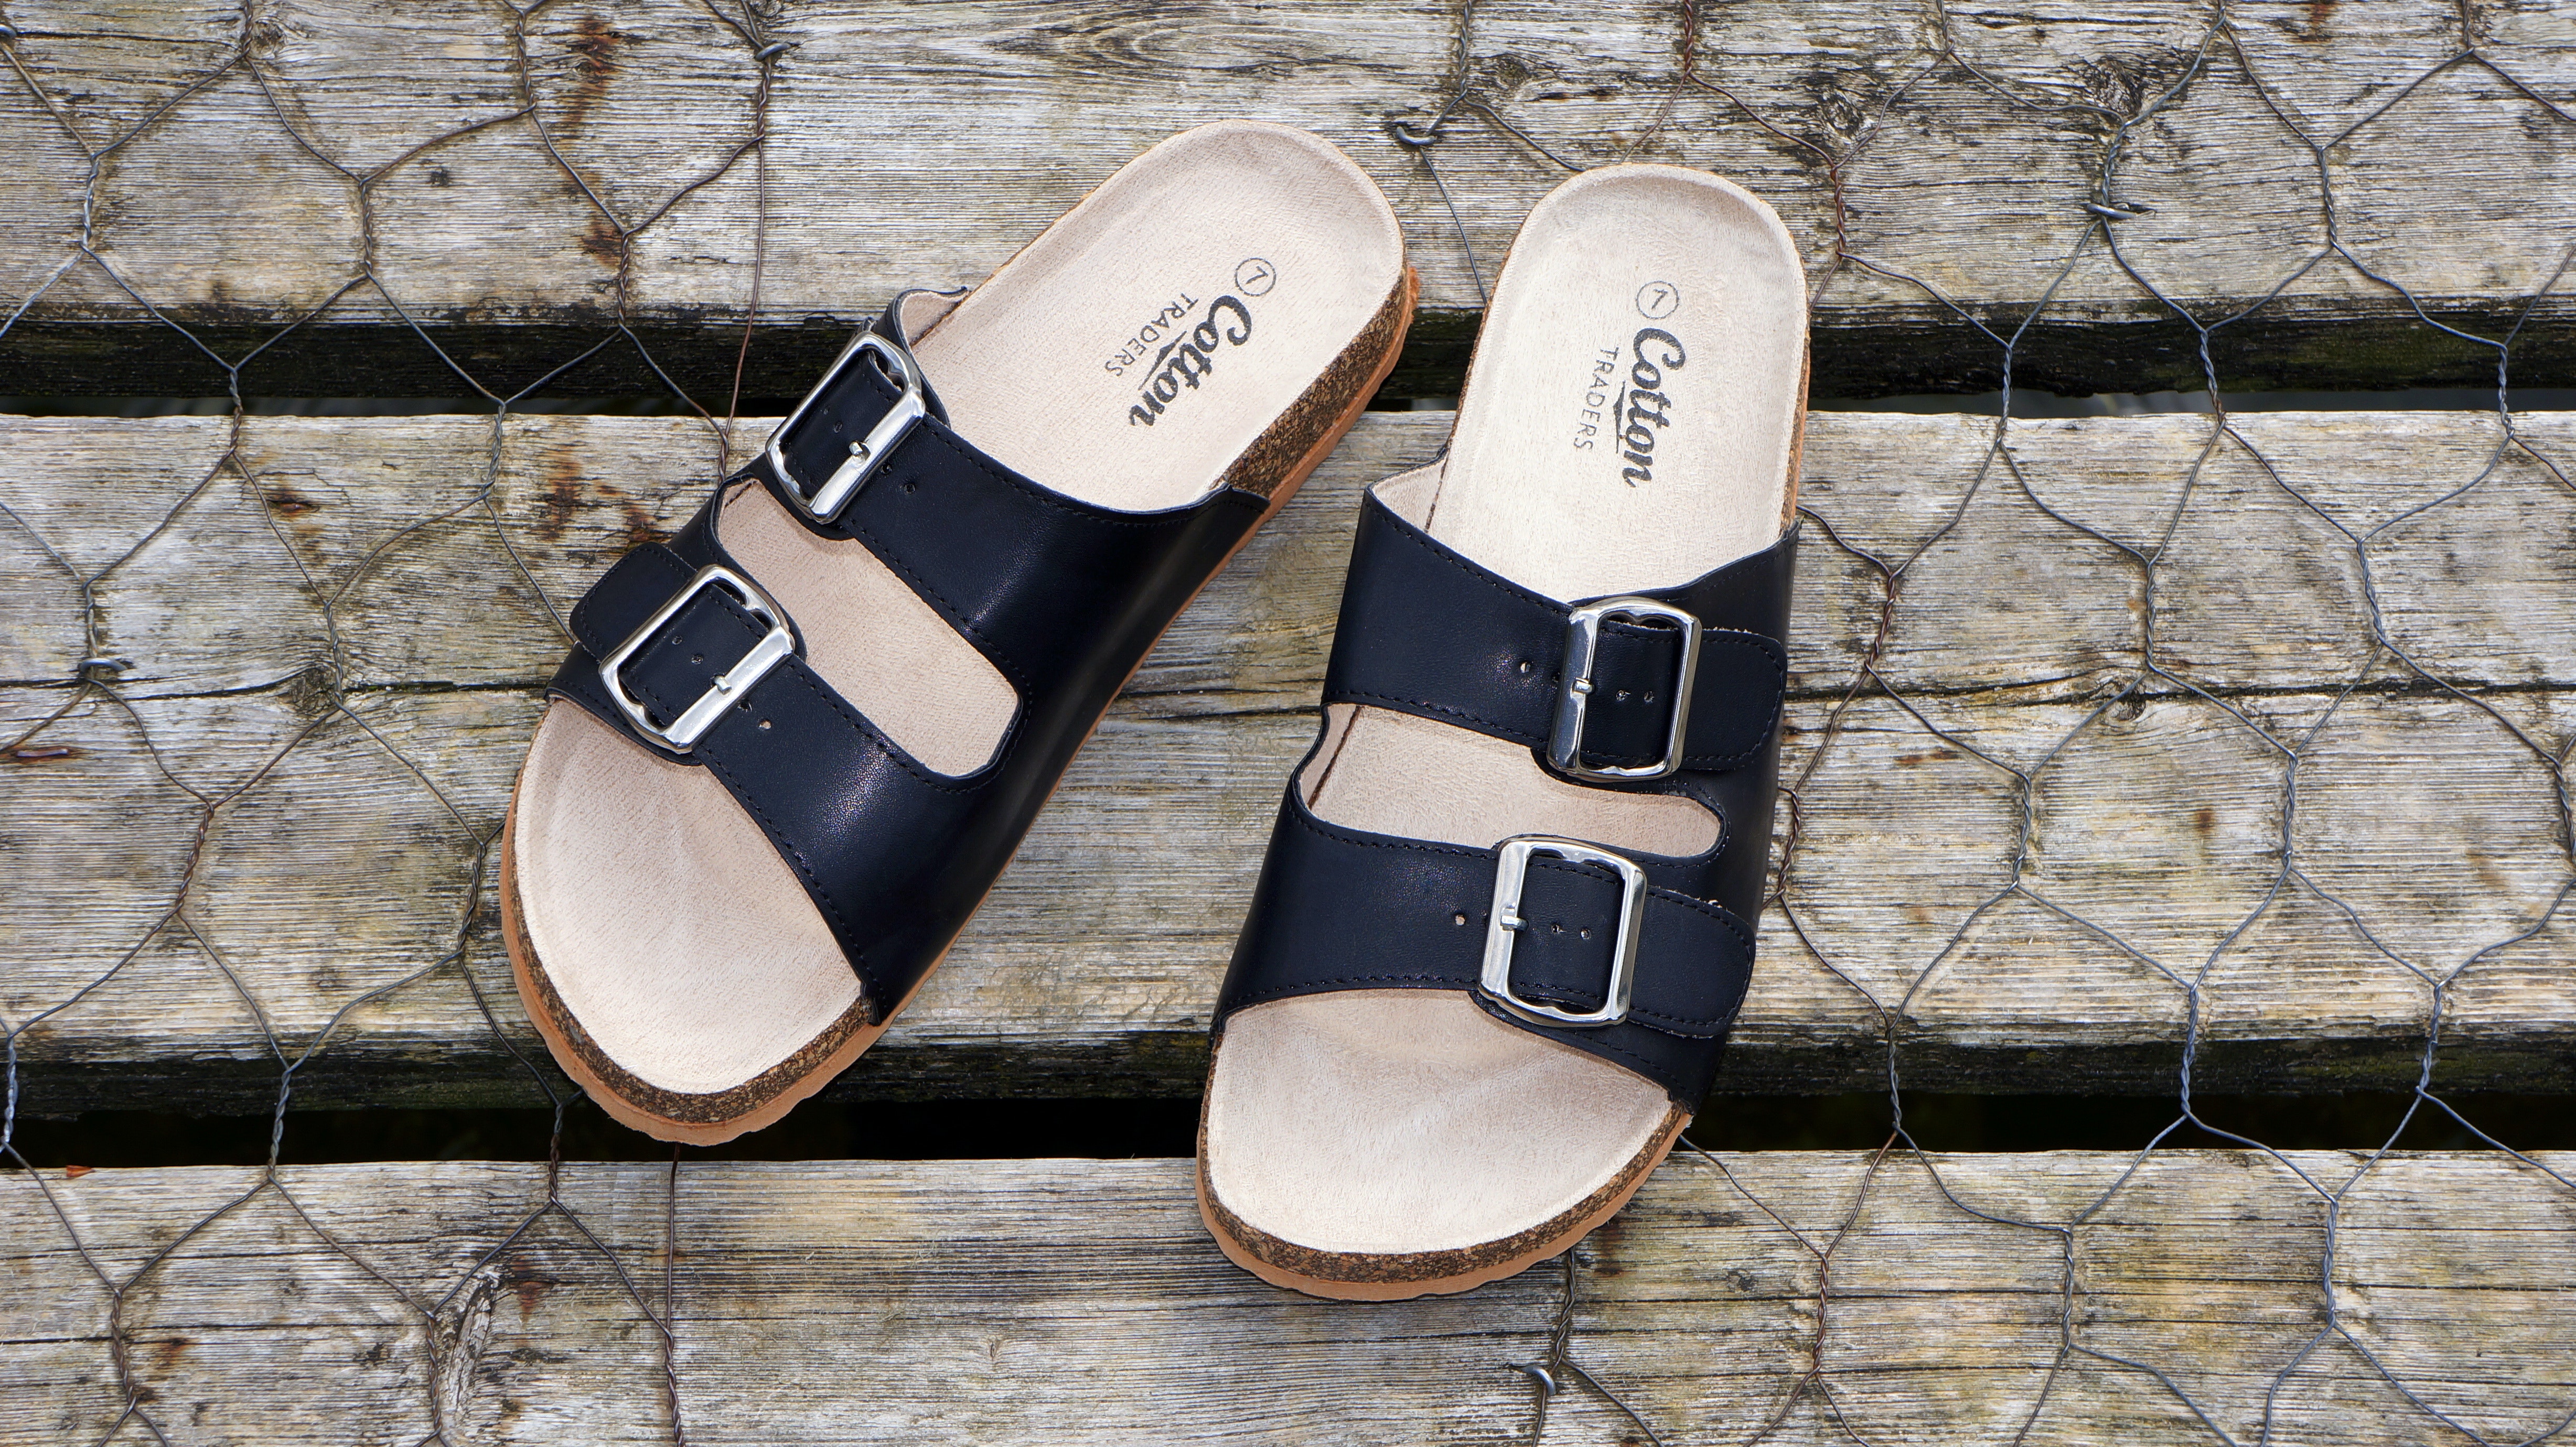 CLN - This season's must-have sandals is already here! Shop the